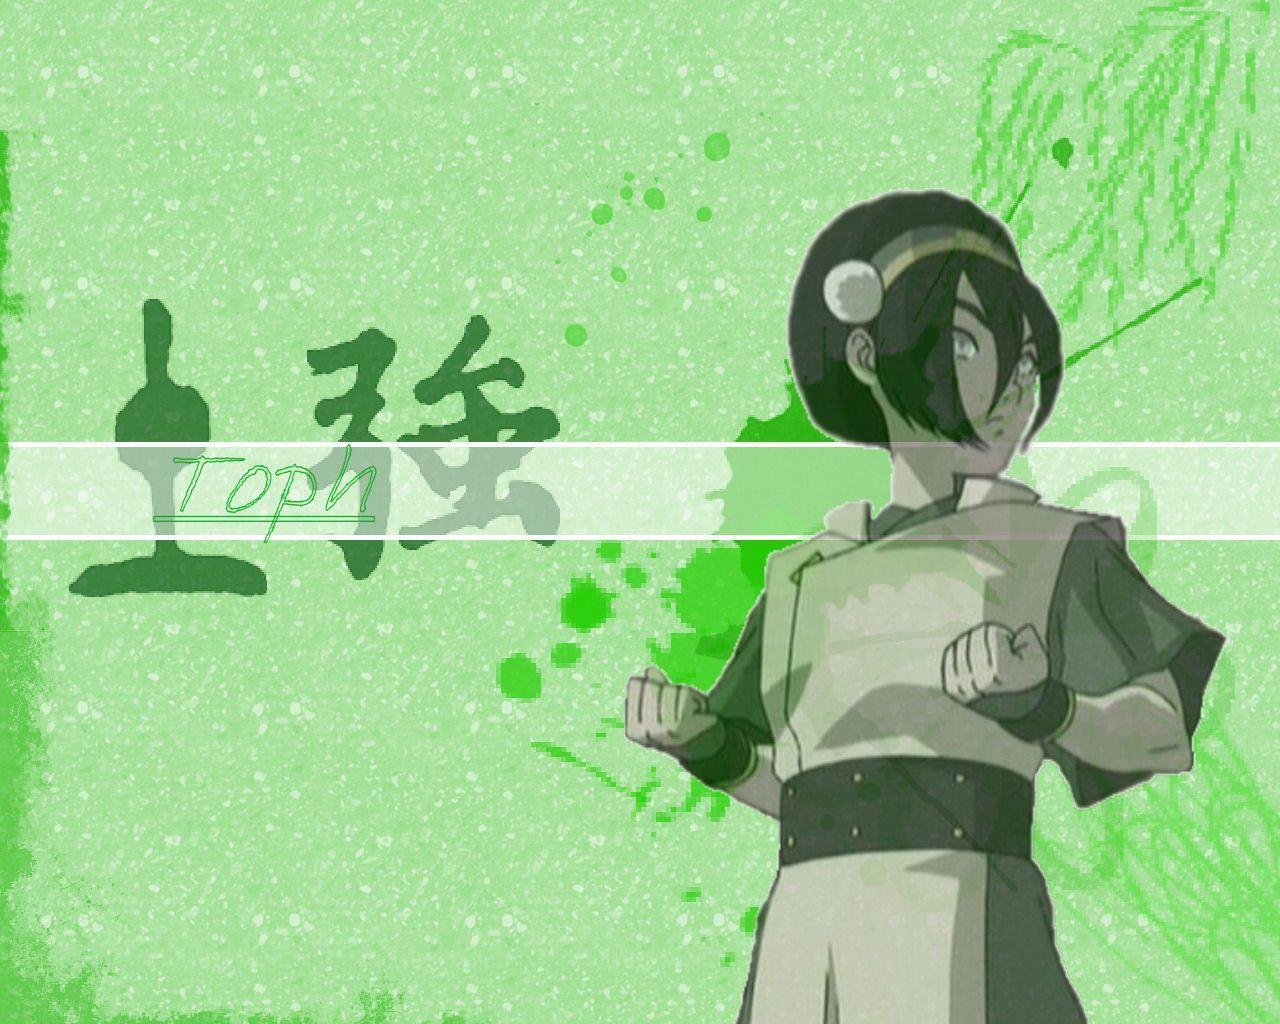 Avatar The Last Airbender Toph. High Definition Wallpaper, High